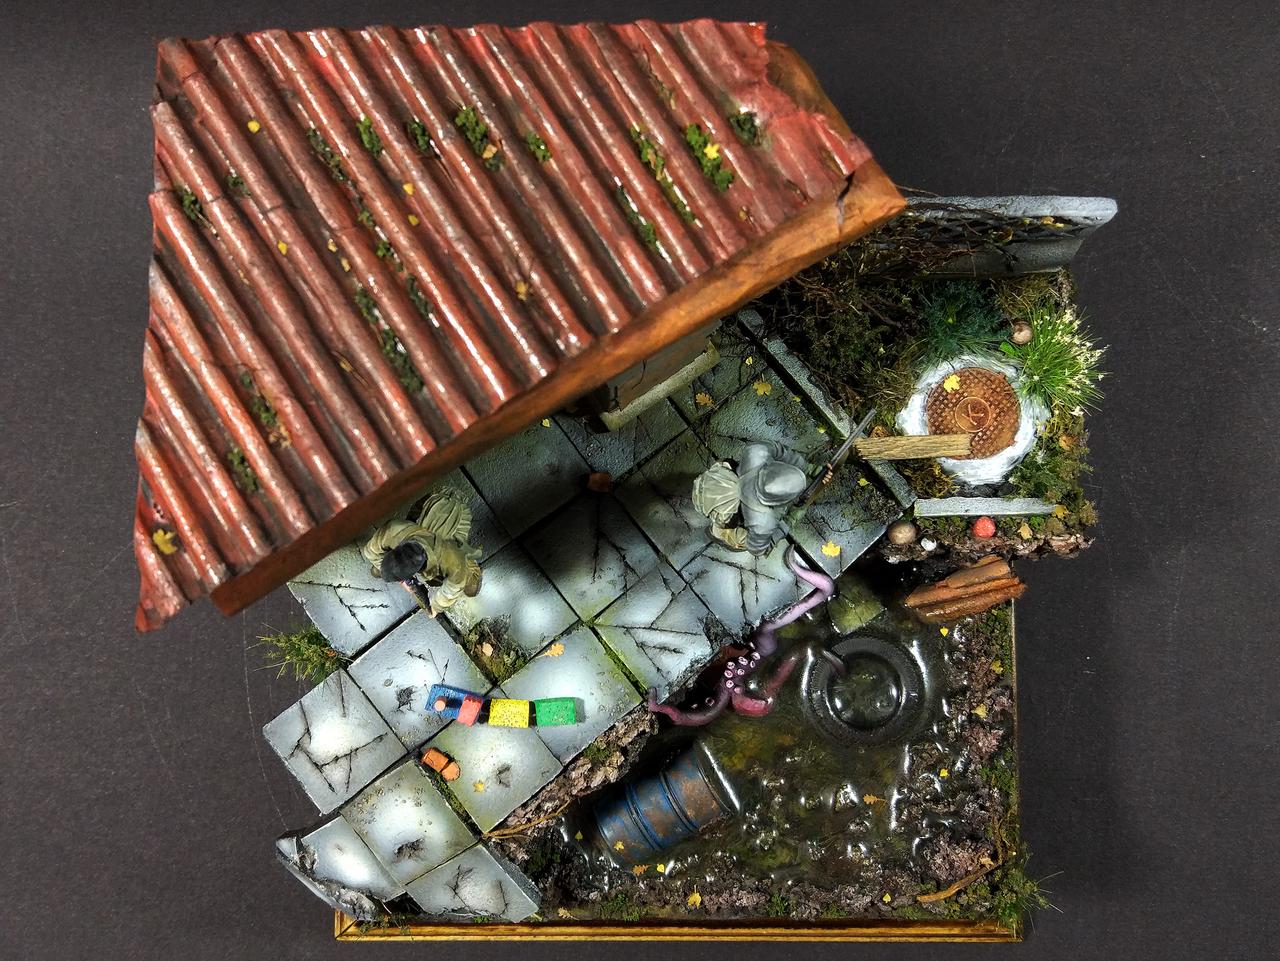 Dioramas and Vignettes: New undiscovered world, photo #5